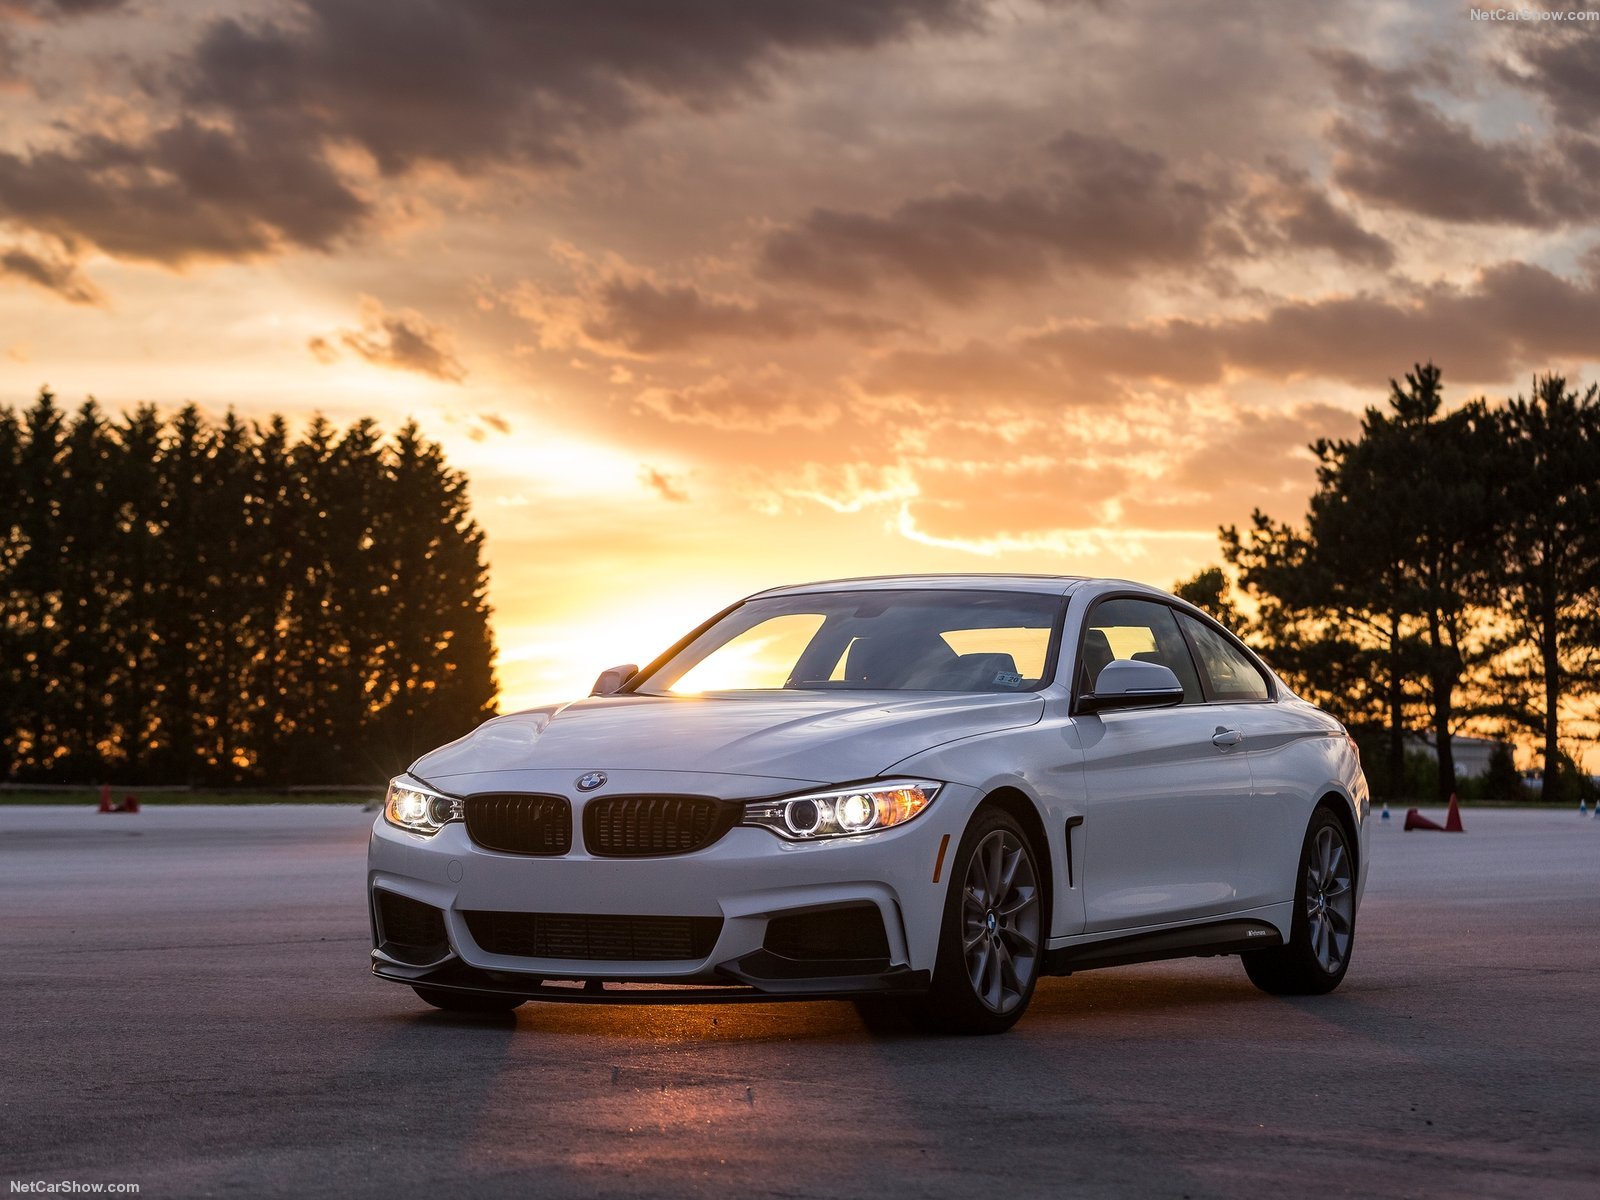 bmw, 435i, Zhp, Coupe, Cars, White, 2016 Wallpaper